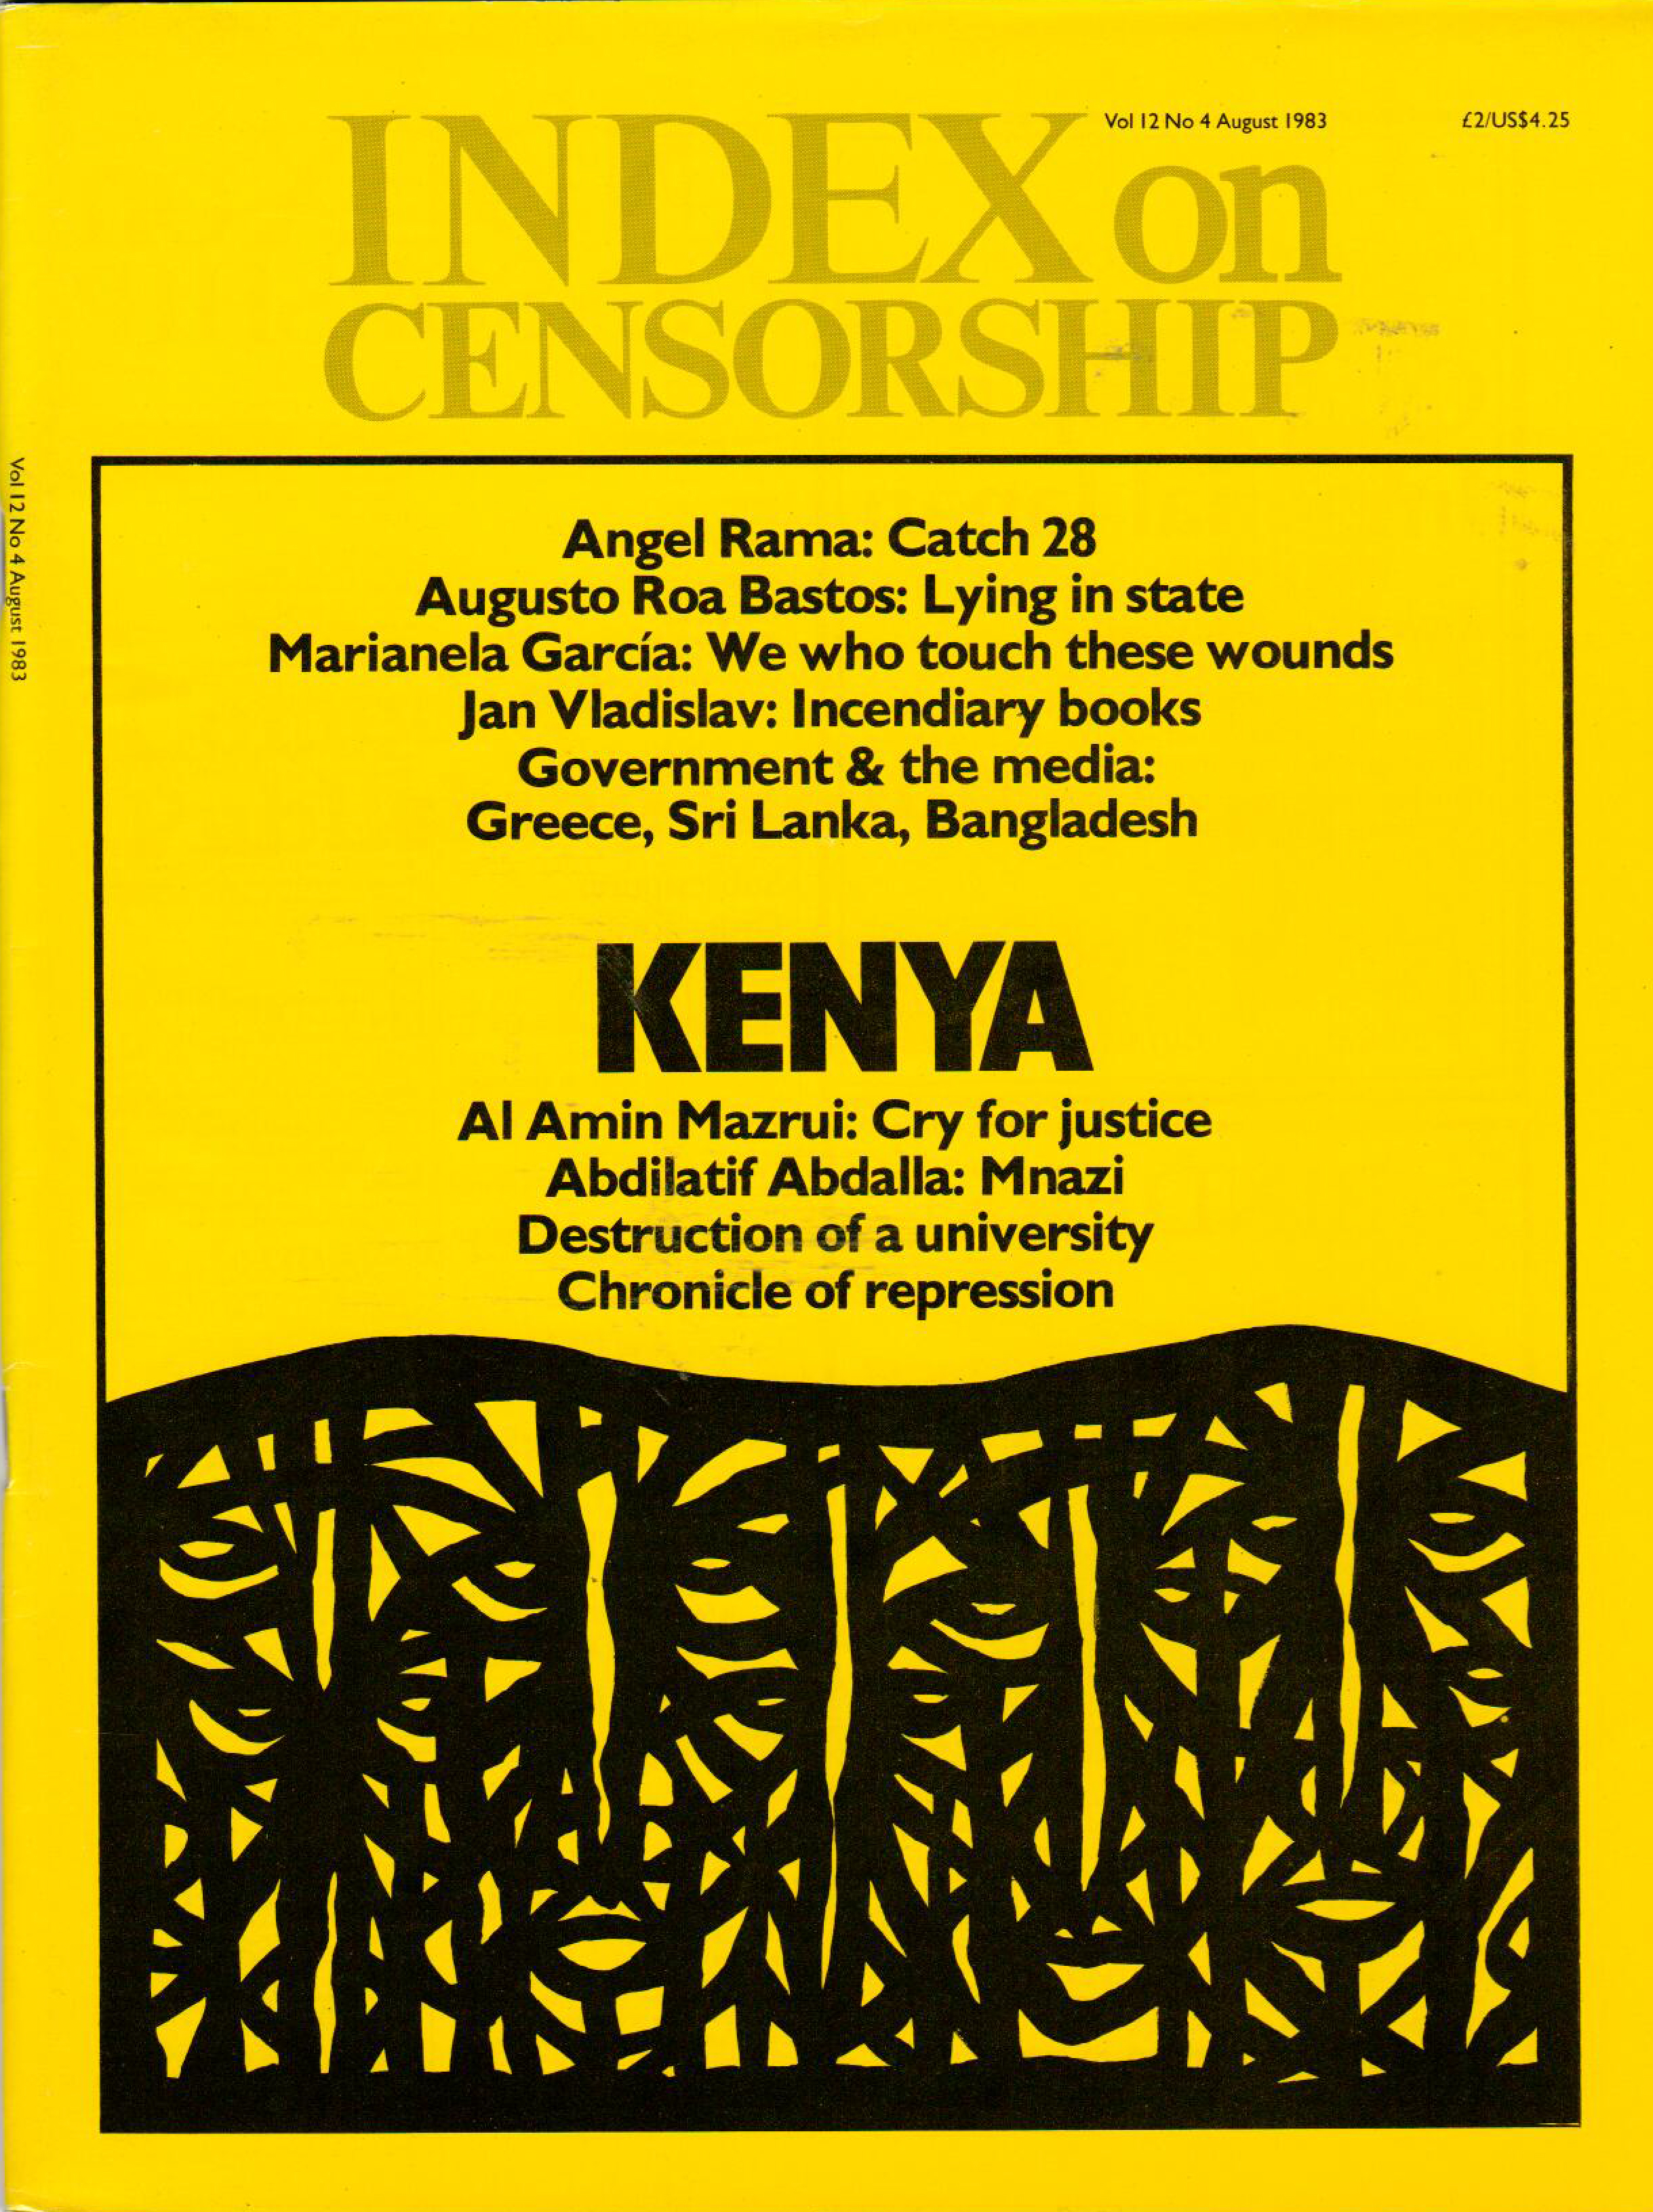 Censorship and Freedoms in Kenya, the August 1983 issue of Index on Censorship magazine.